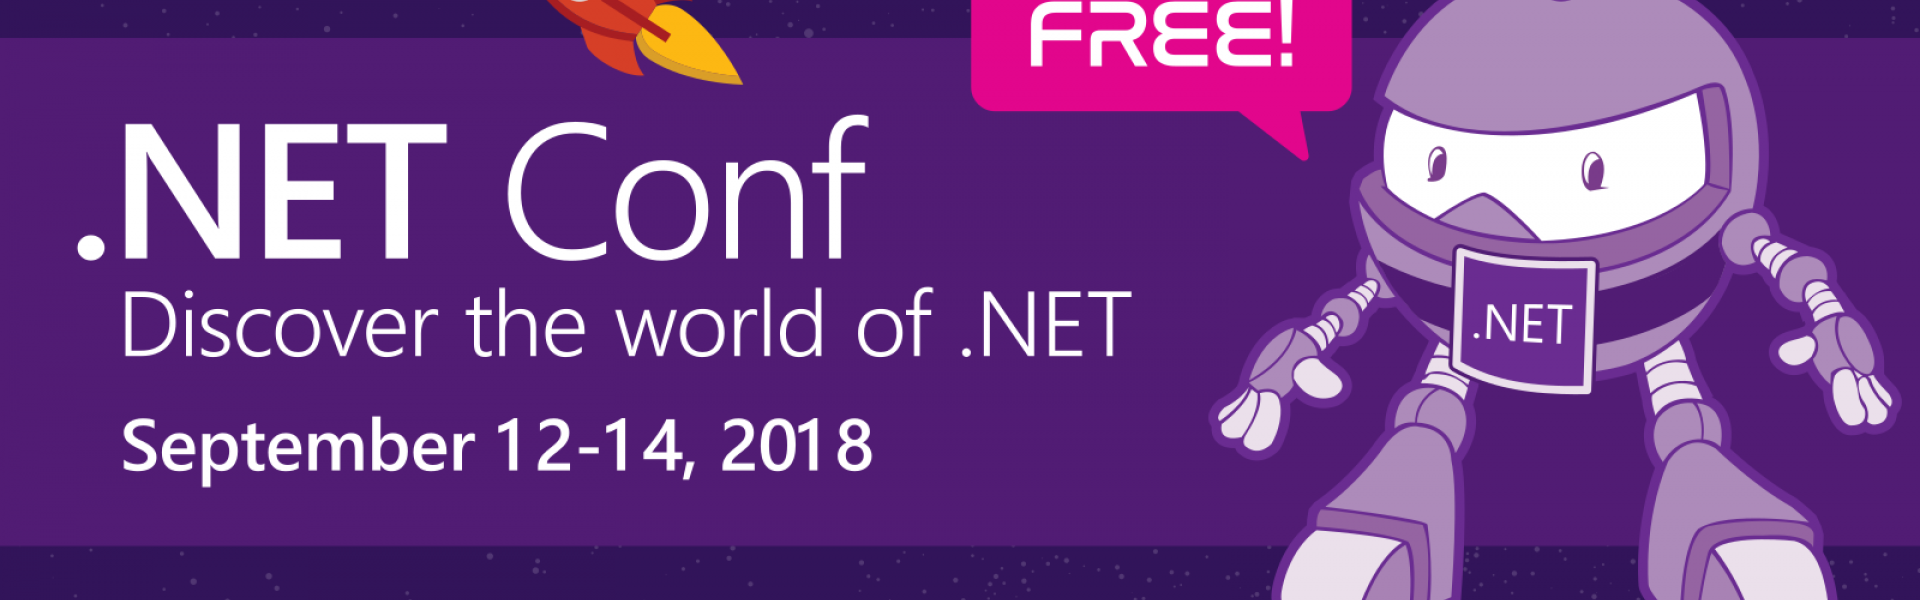 .NET by VISEO